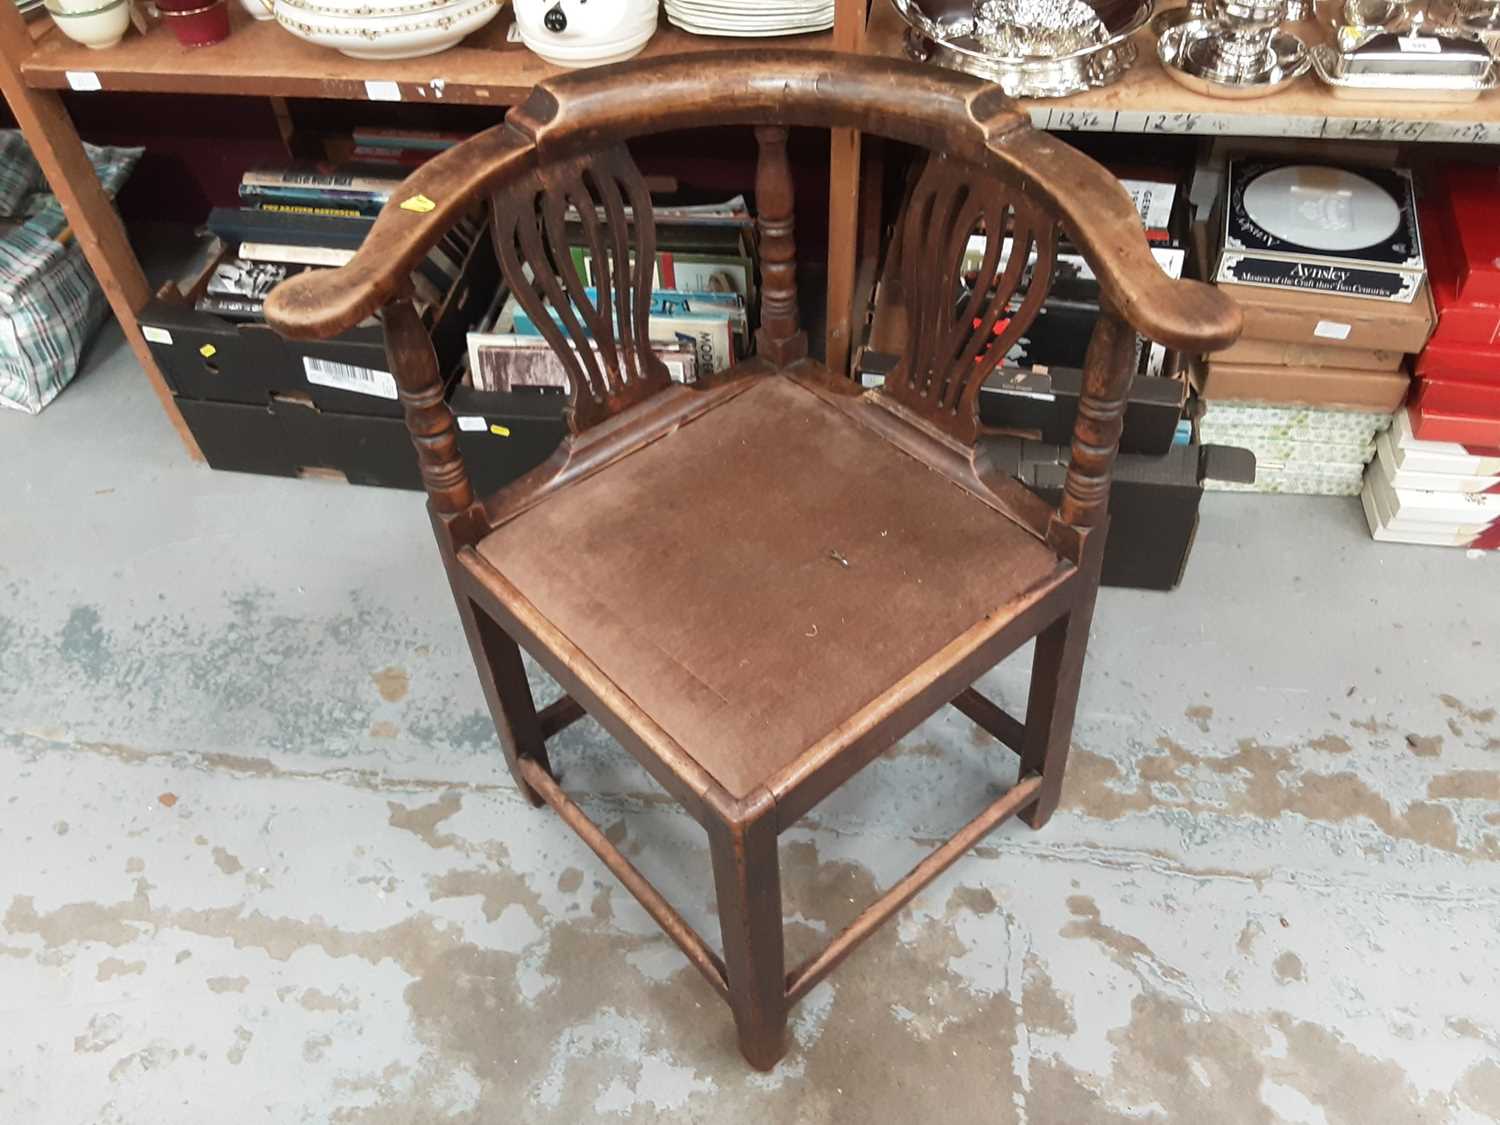 Lot 902 - Corner chair with drop in seat